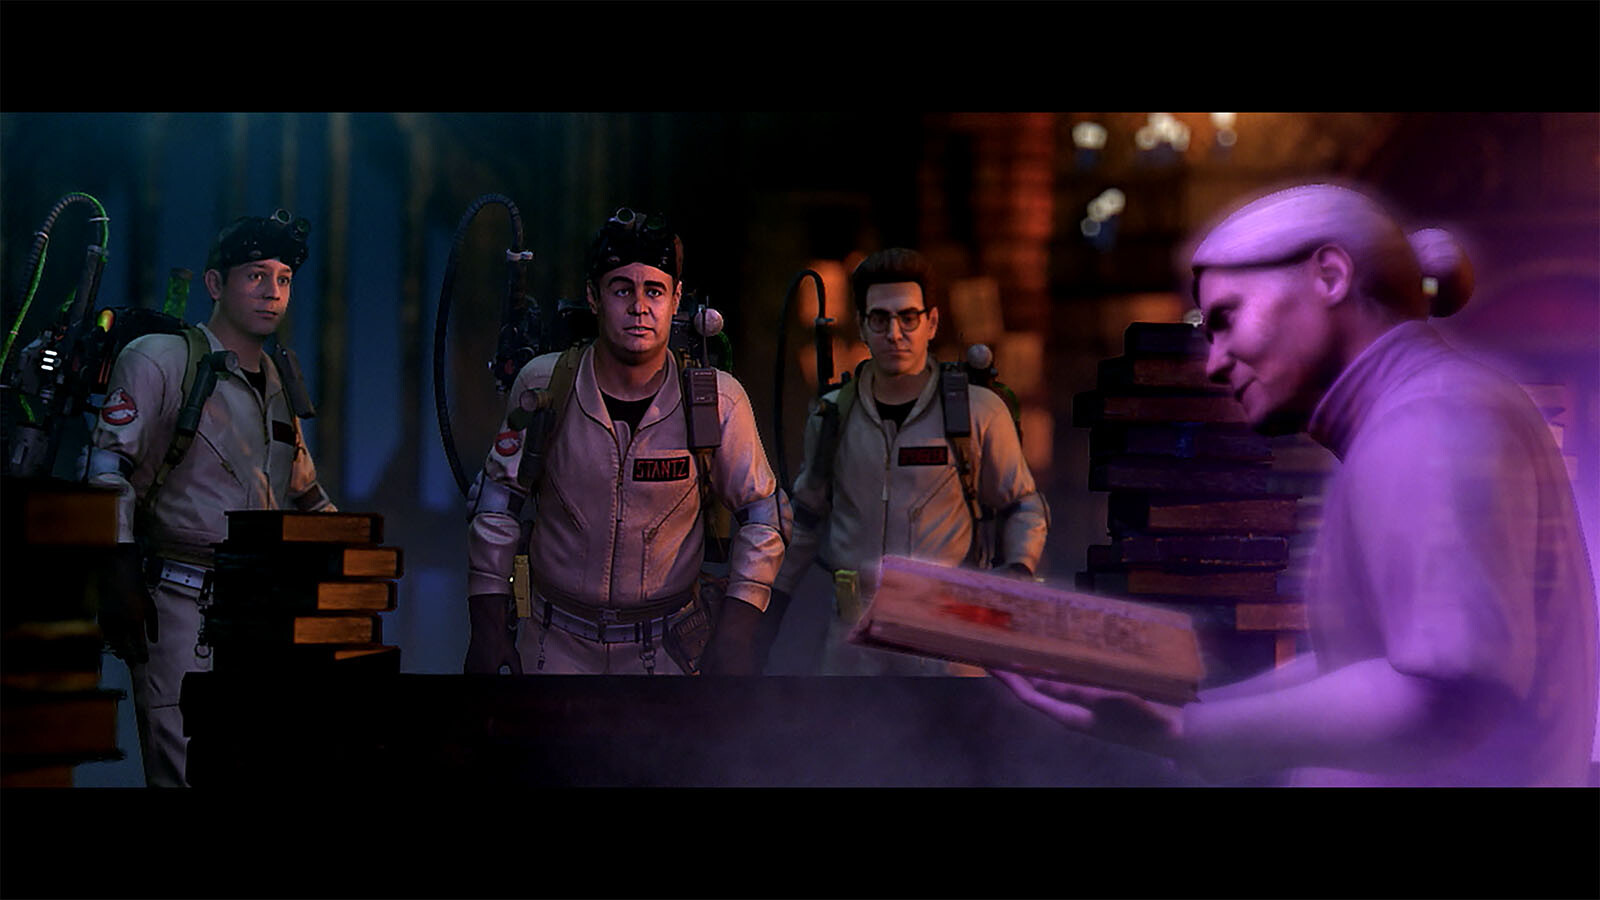 ghostbusters the video game remastered pc download